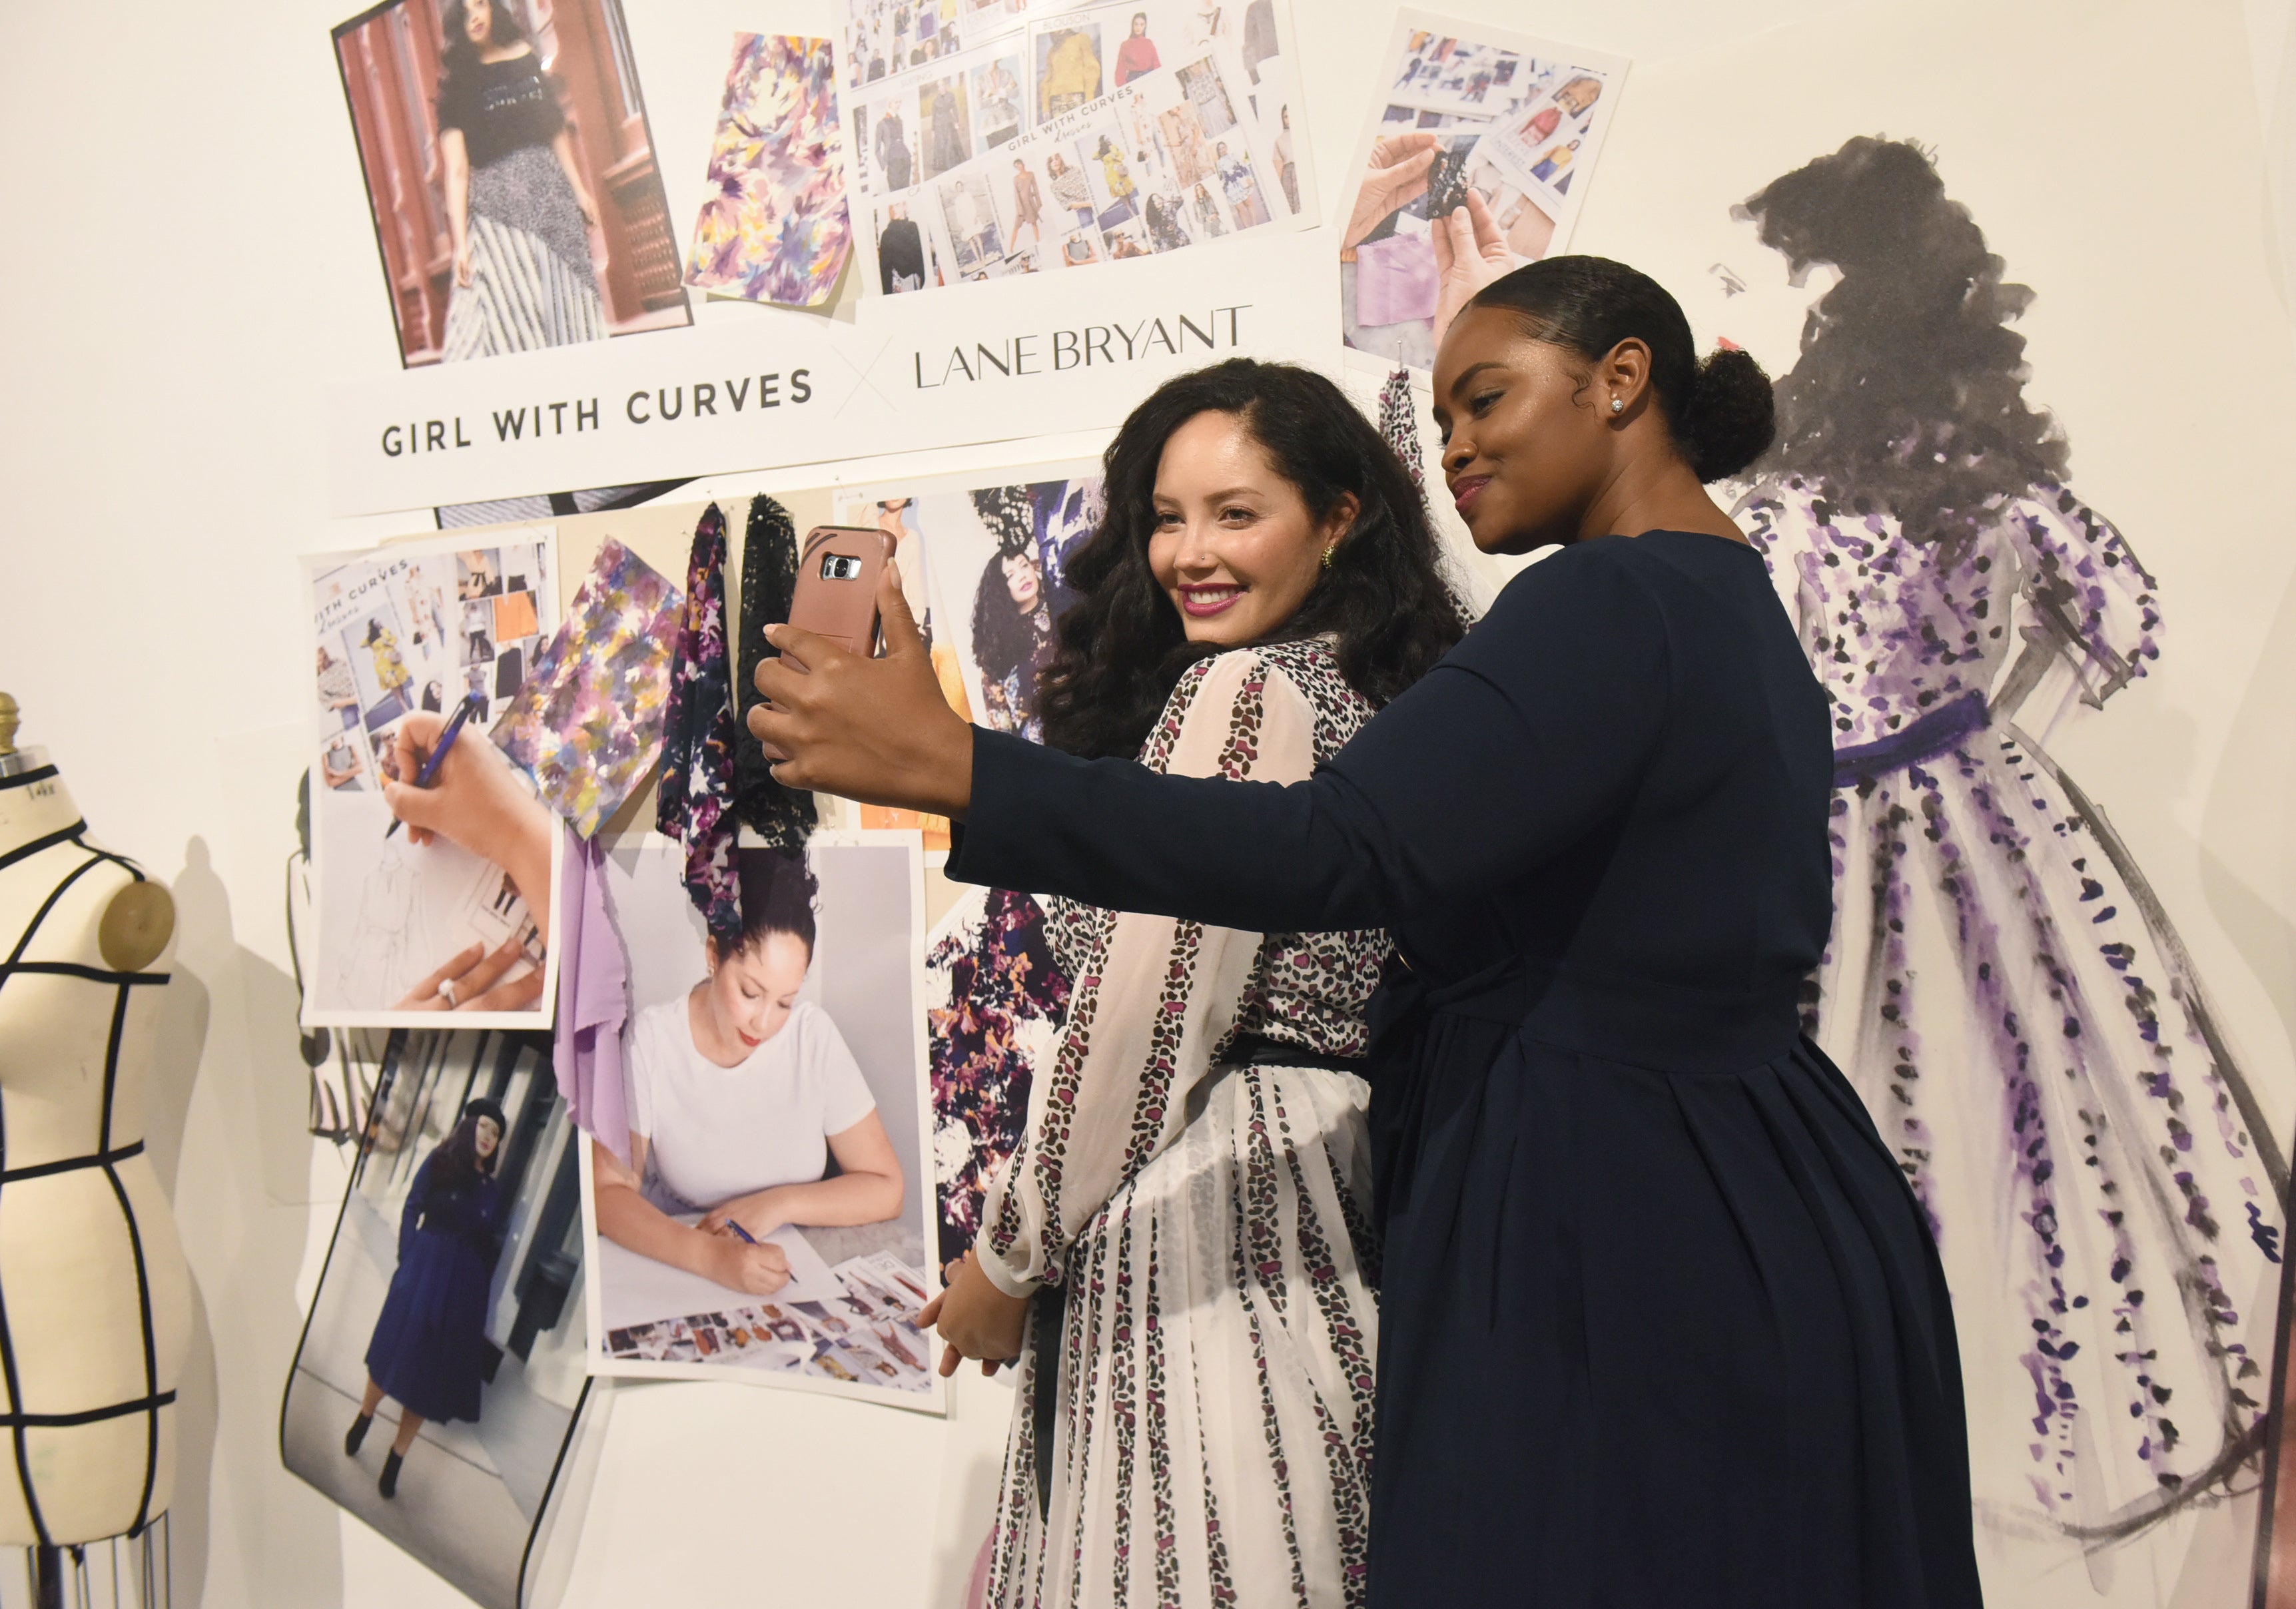 Girl With Curves Teams Up With Lane Bryant To Create A New Eye